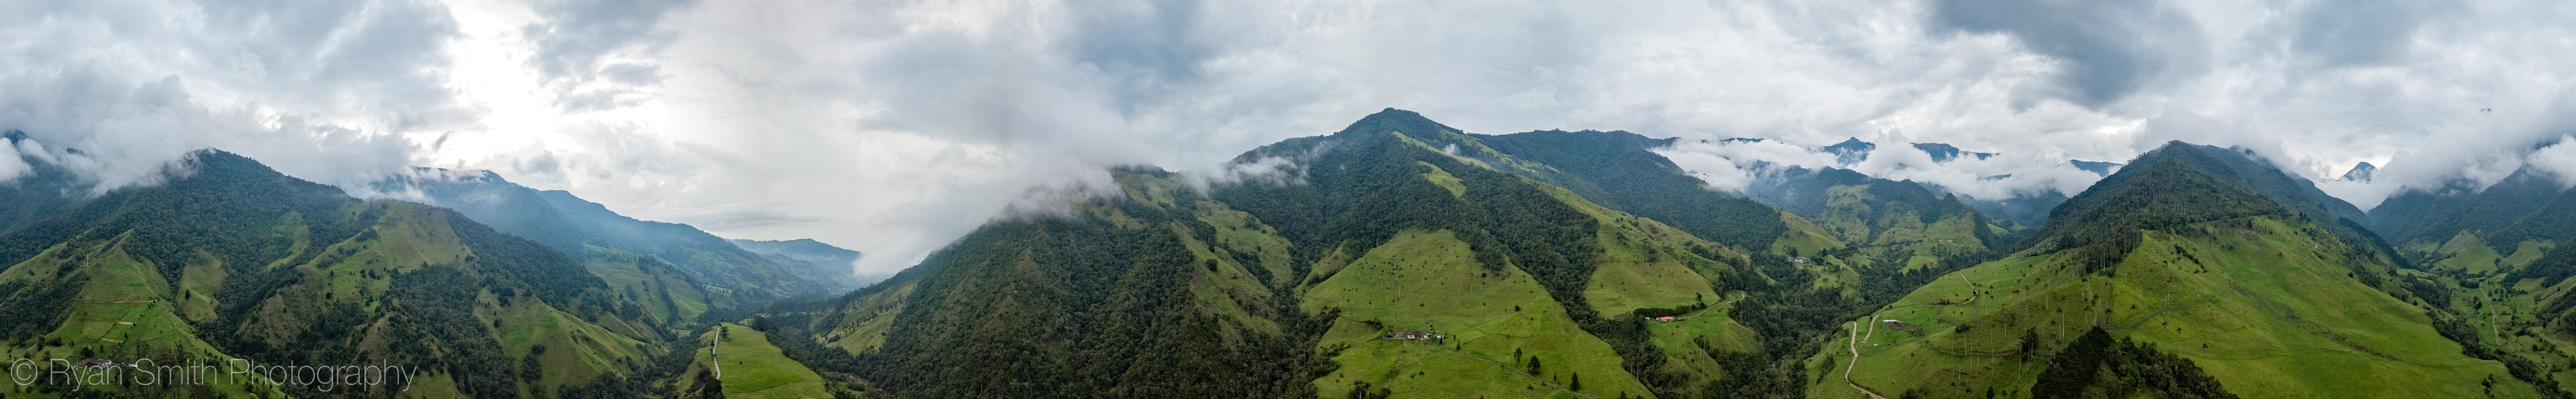 360 degree drone aerial photography of Cocora Valley and the Wax Palms in Colombia